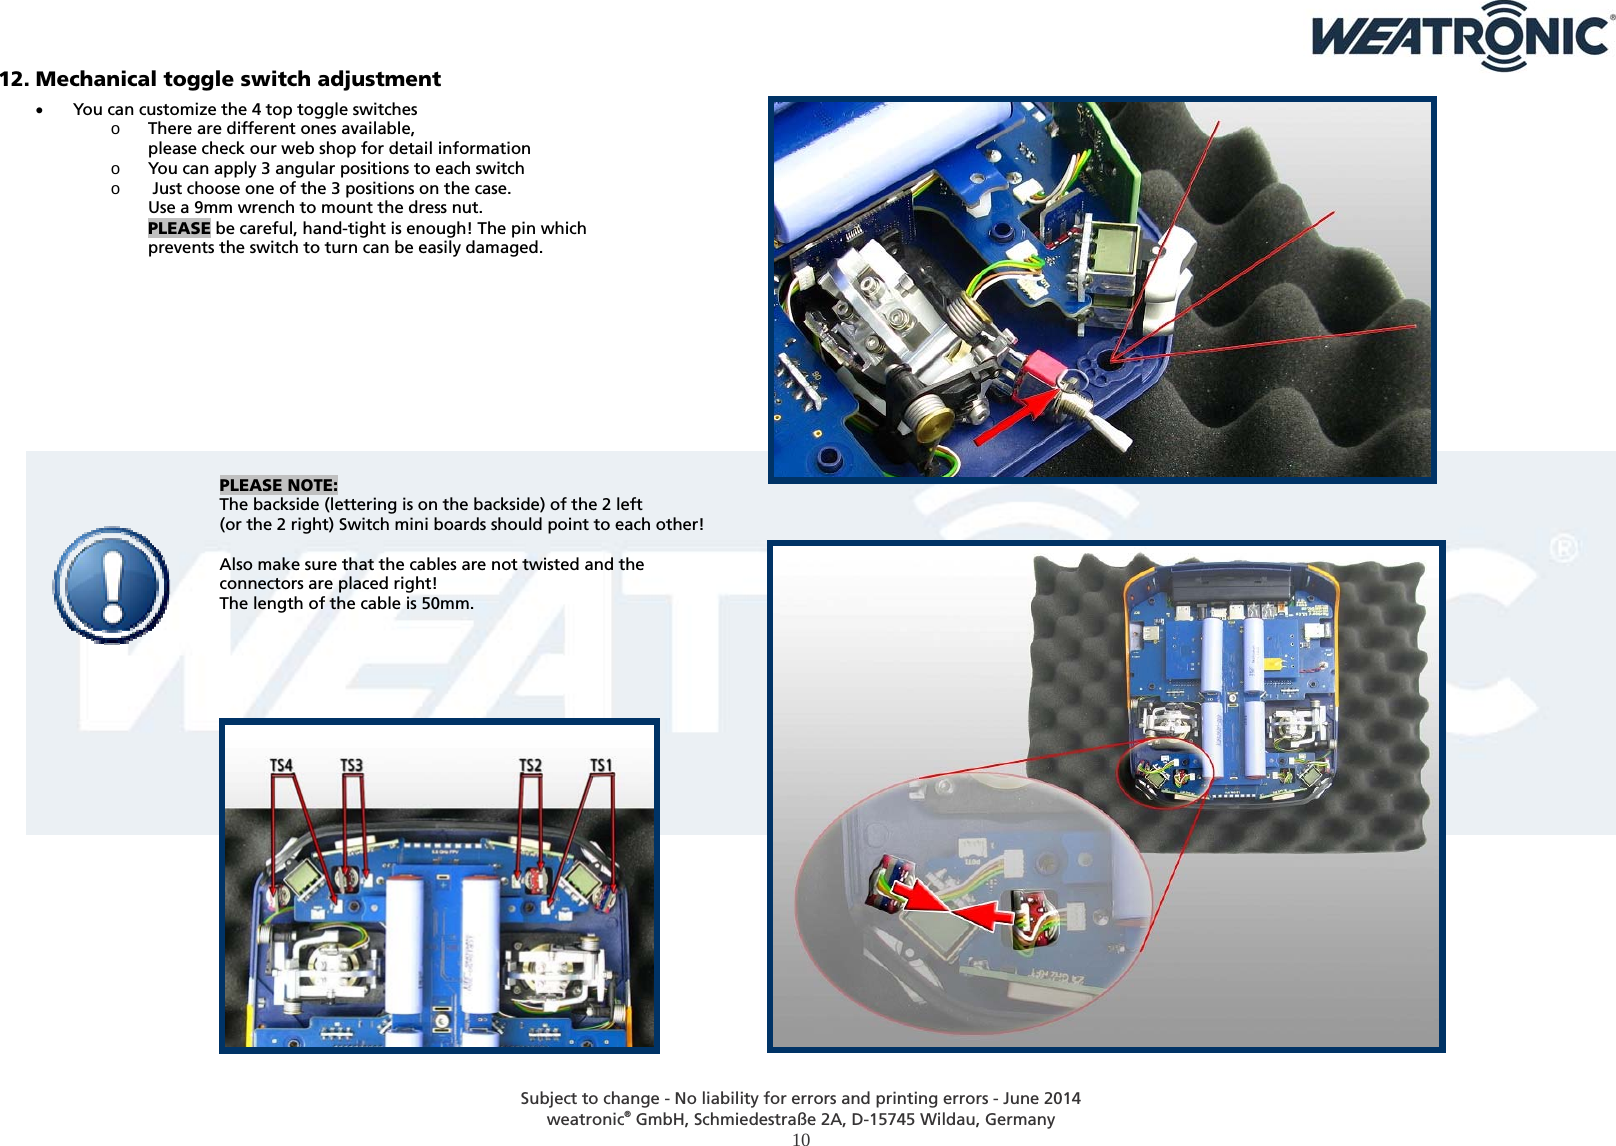  Subject to change - No liability for errors and printing errors - June 2014 weatronic® GmbH, Schmiedestraße 2A, D-15745 Wildau, Germany  10 12. Mechanical toggle switch adjustment  You can customize the 4 top toggle switches o There are different ones available,  please check our web shop for detail information o You can apply 3 angular positions to each switch o  Just choose one of the 3 positions on the case.  Use a 9mm wrench to mount the dress nut. PLEASE be careful, hand-tight is enough! The pin which prevents the switch to turn can be easily damaged.            PLEASE NOTE:  The backside (lettering is on the backside) of the 2 left  (or the 2 right) Switch mini boards should point to each other!   Also make sure that the cables are not twisted and the  connectors are placed right!  The length of the cable is 50mm.         